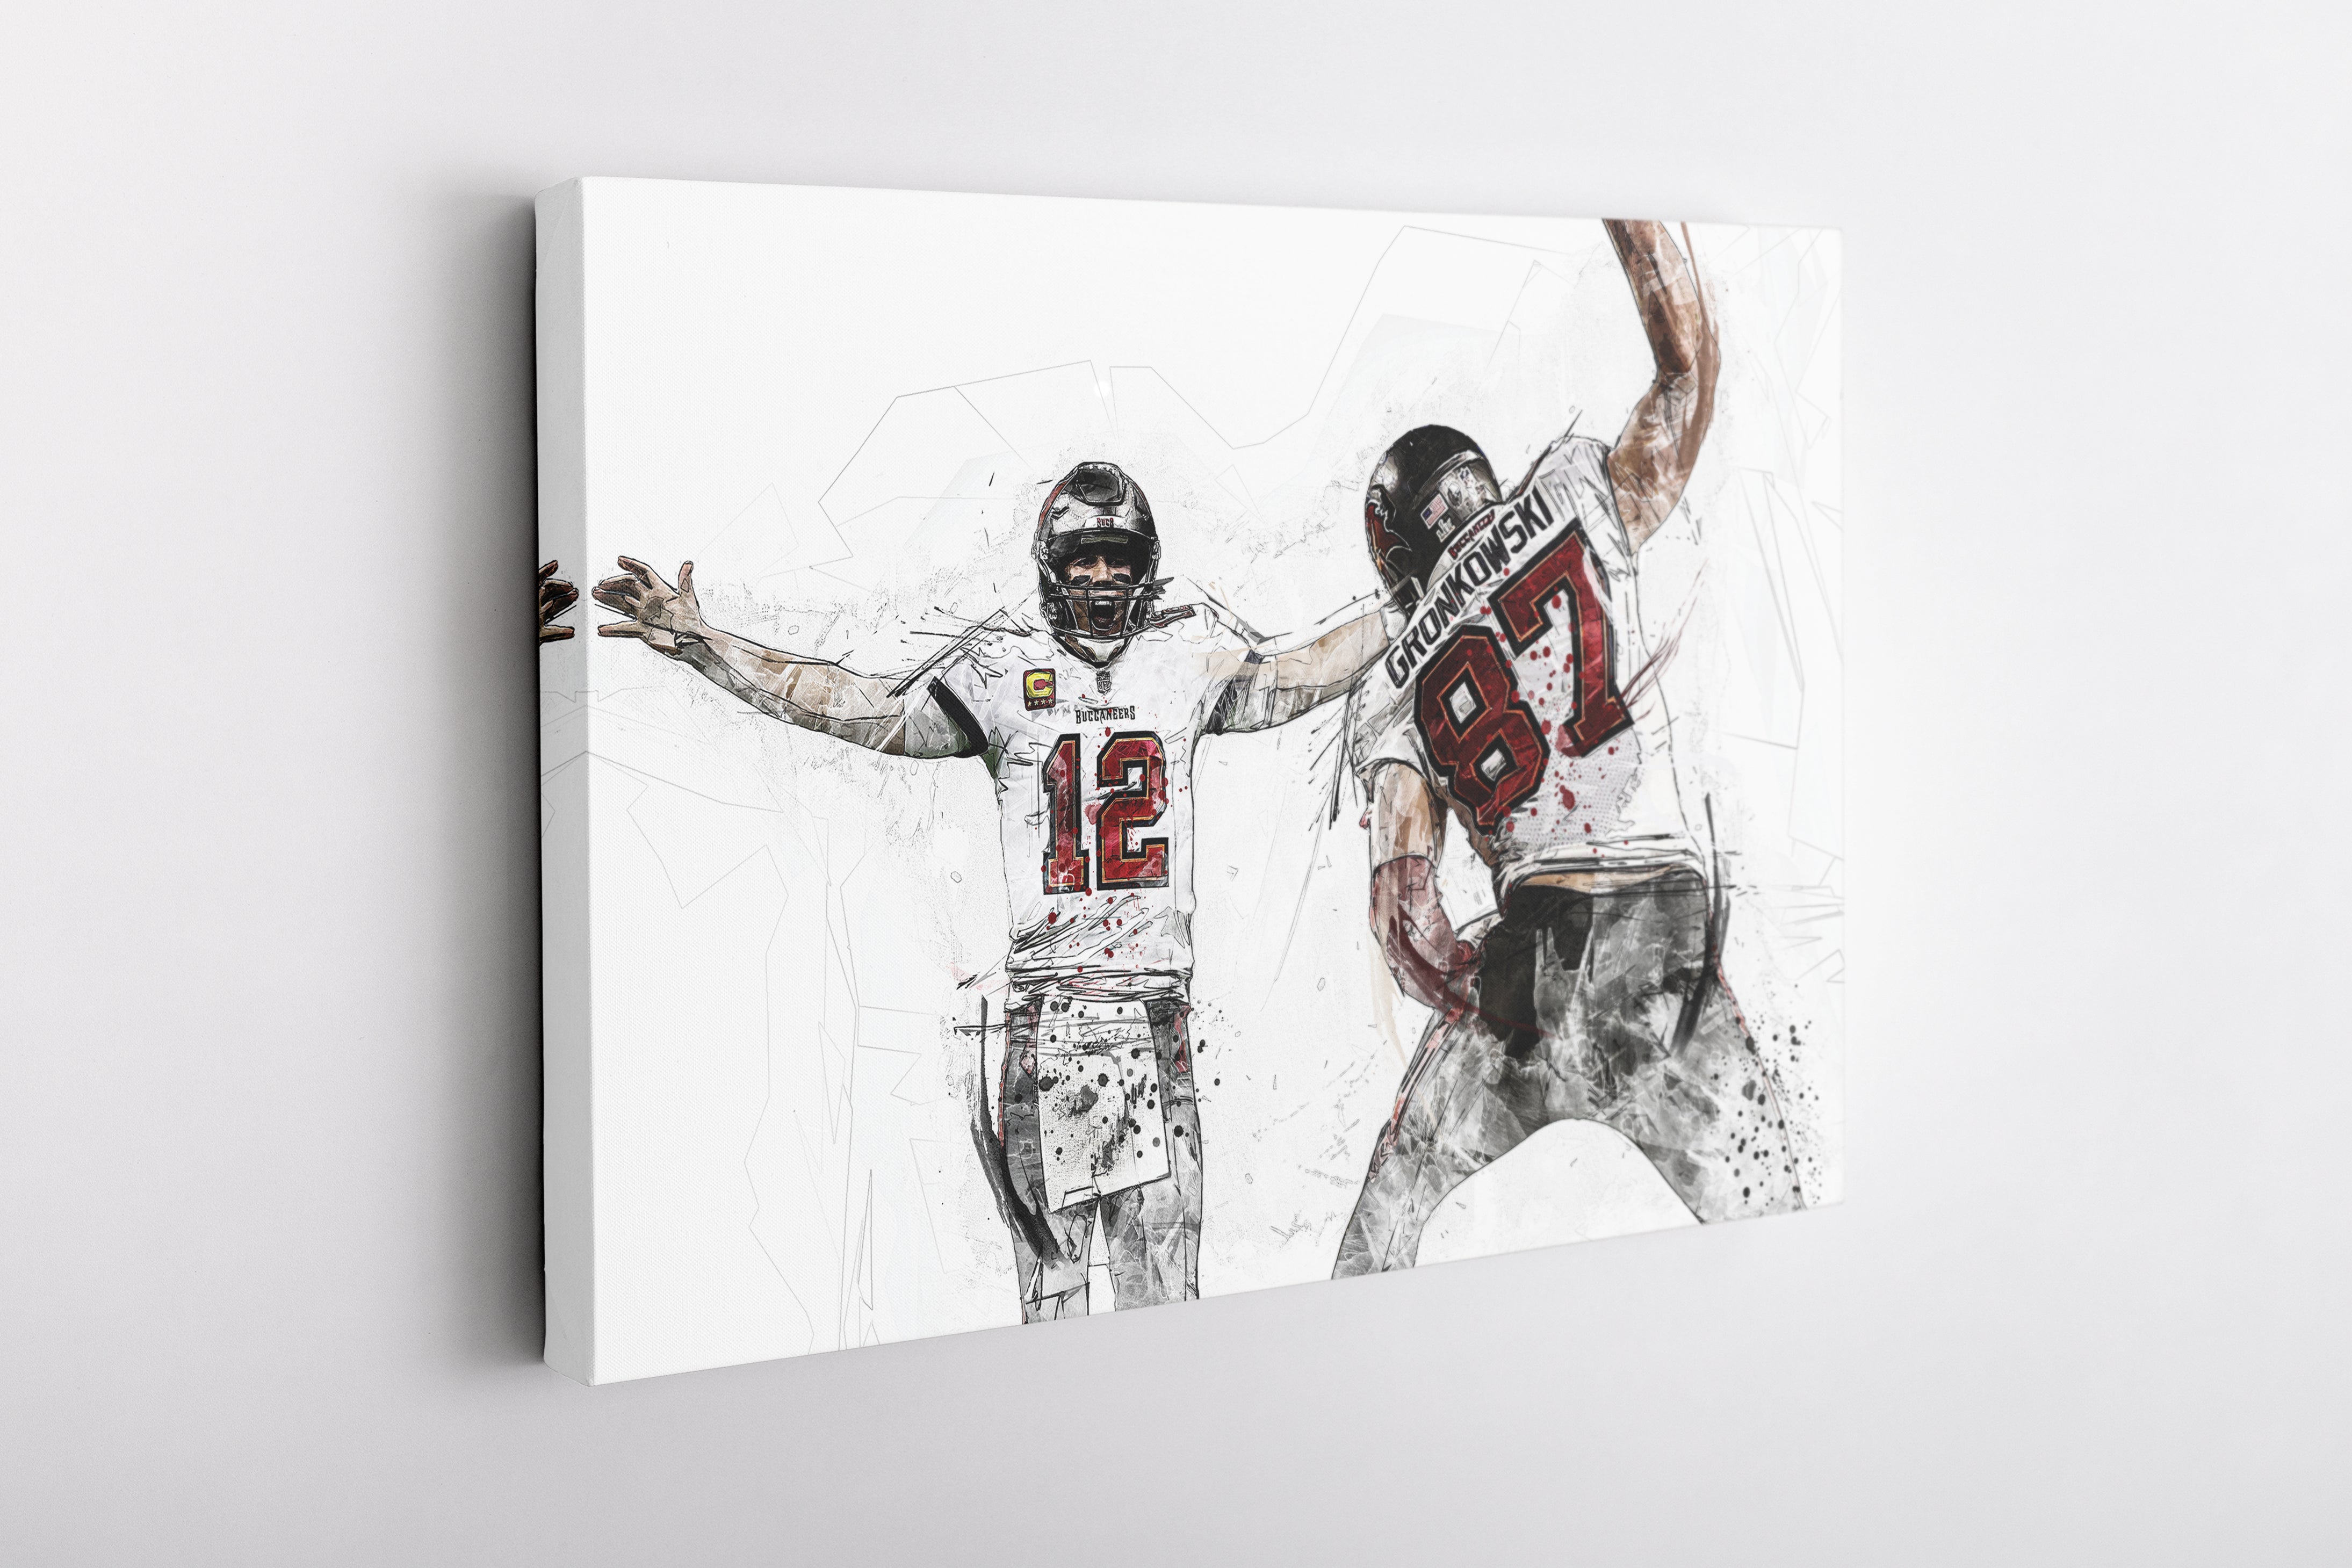 Rob Gronkowski Buc Power Tampa Bay Buccaneers Official NFL Football –  Sports Poster Warehouse